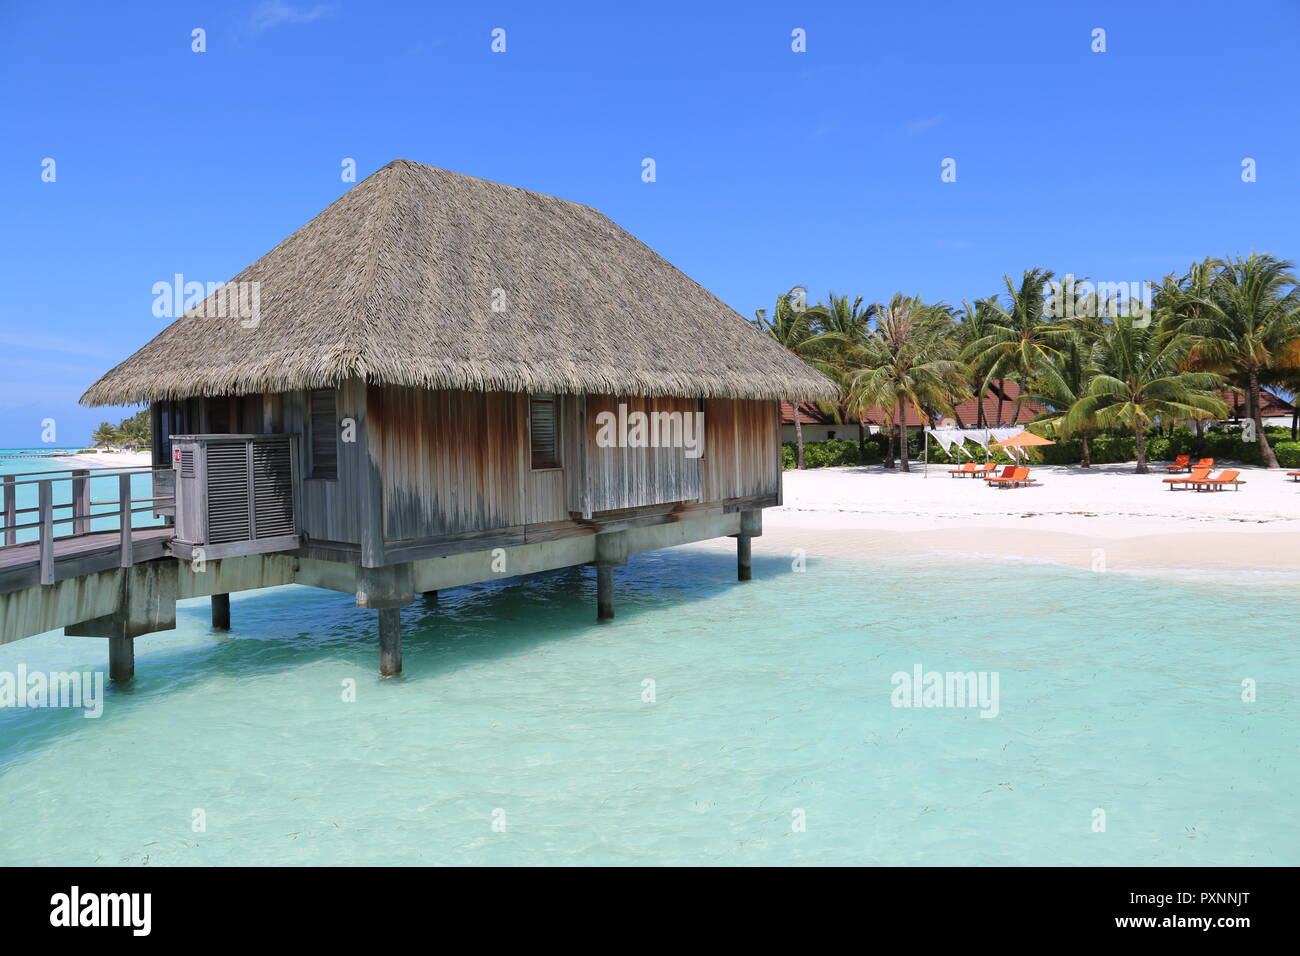 Over-water bungalow in the Maldives Stock Photo